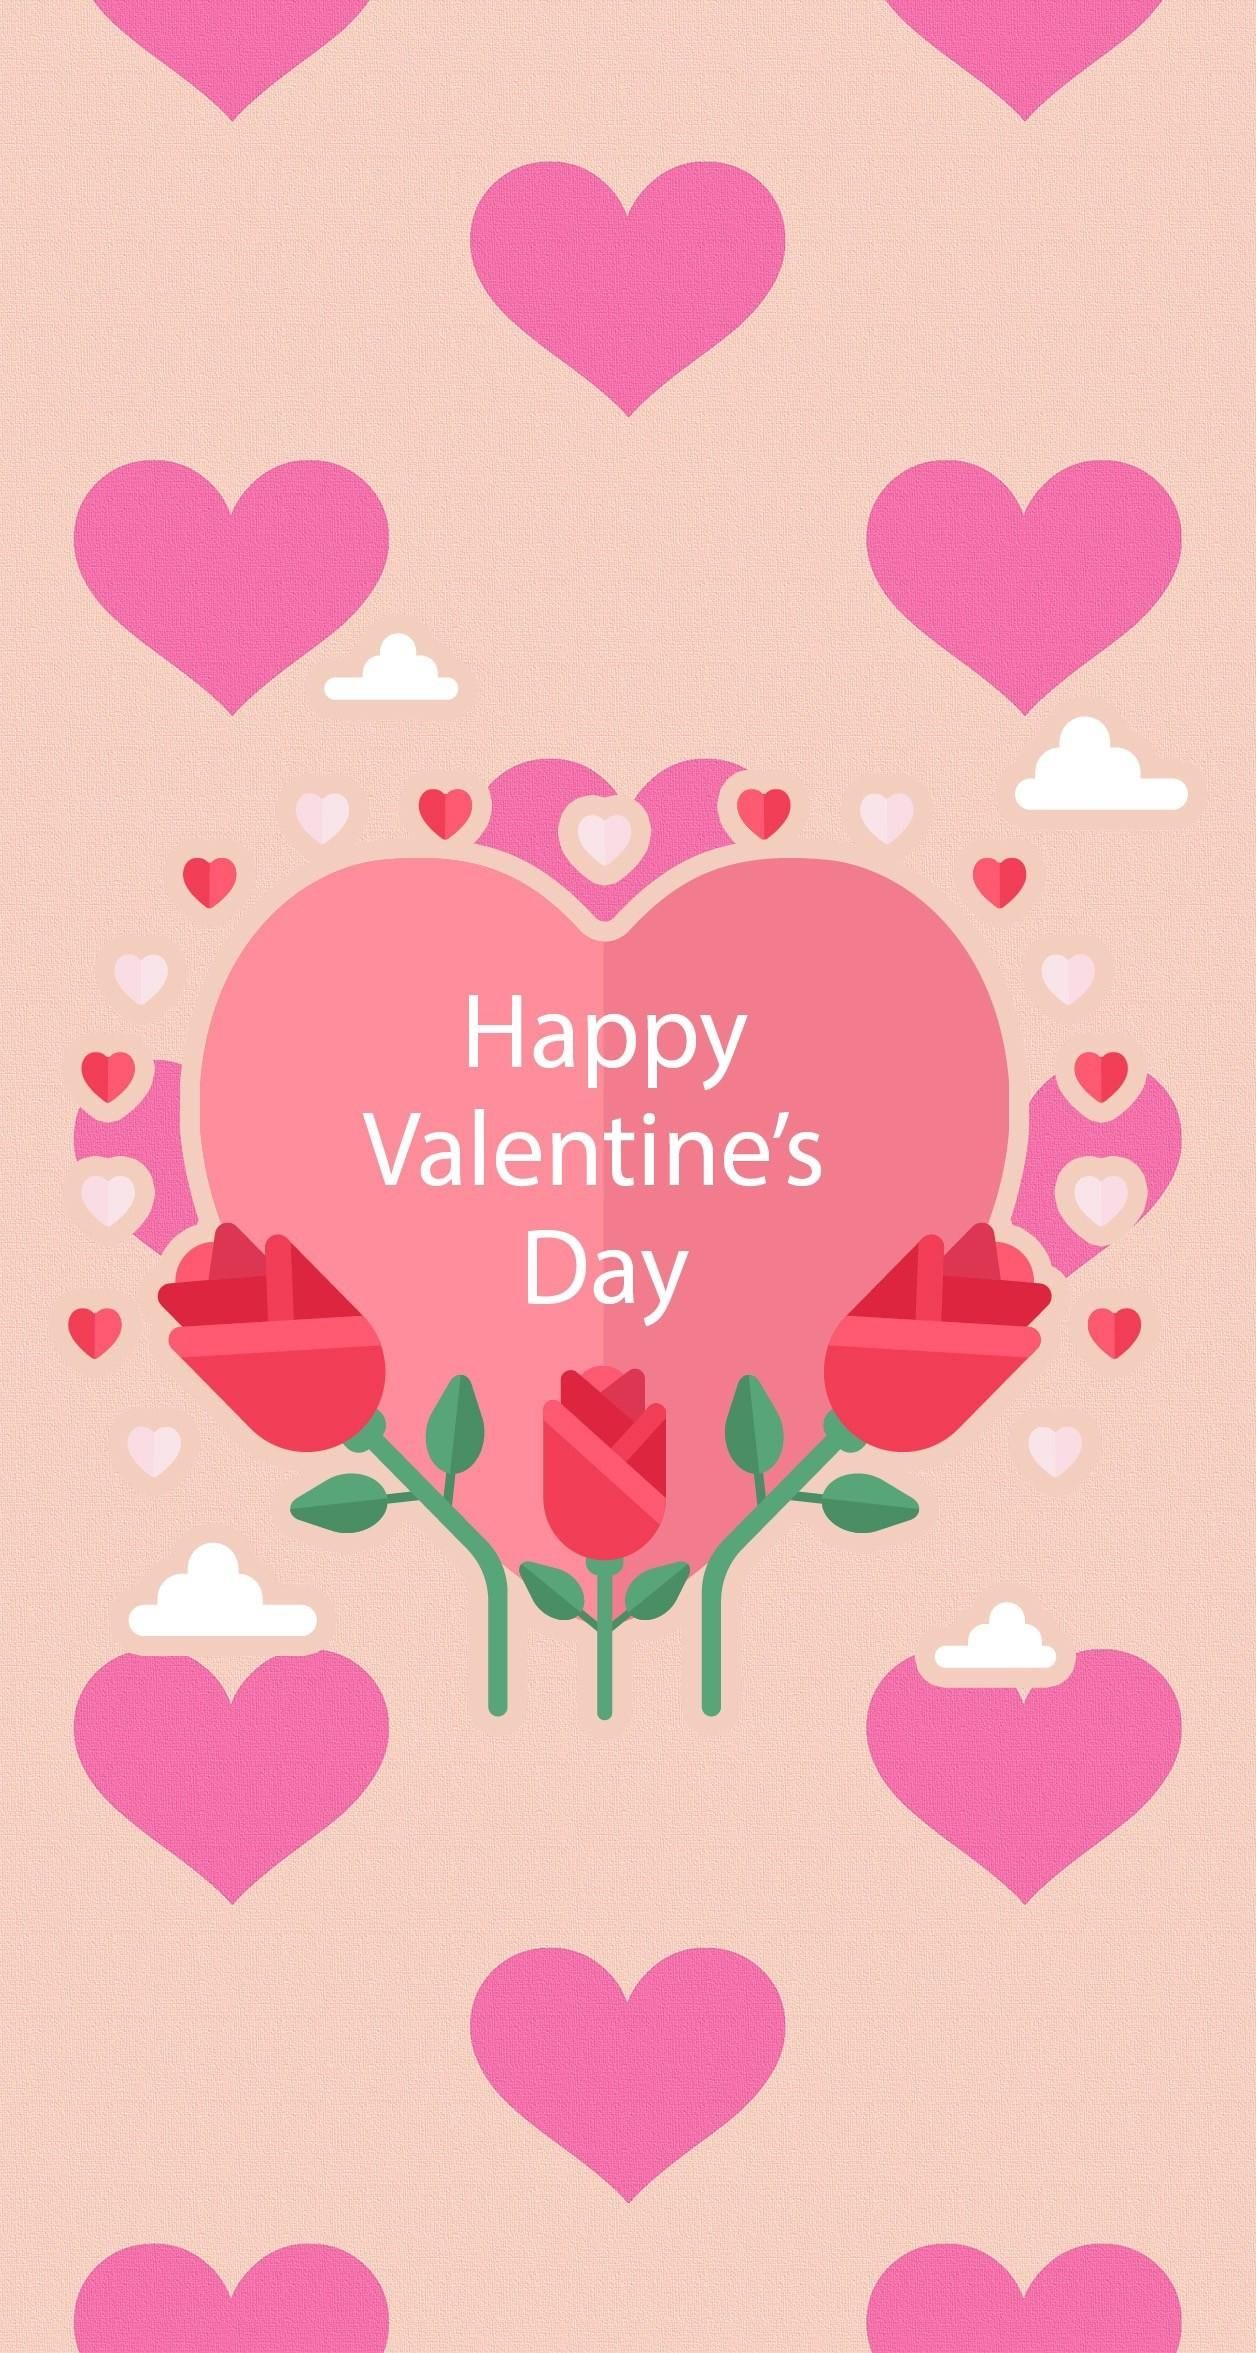 A Valentine's Day card with hearts and roses. - Valentine's Day